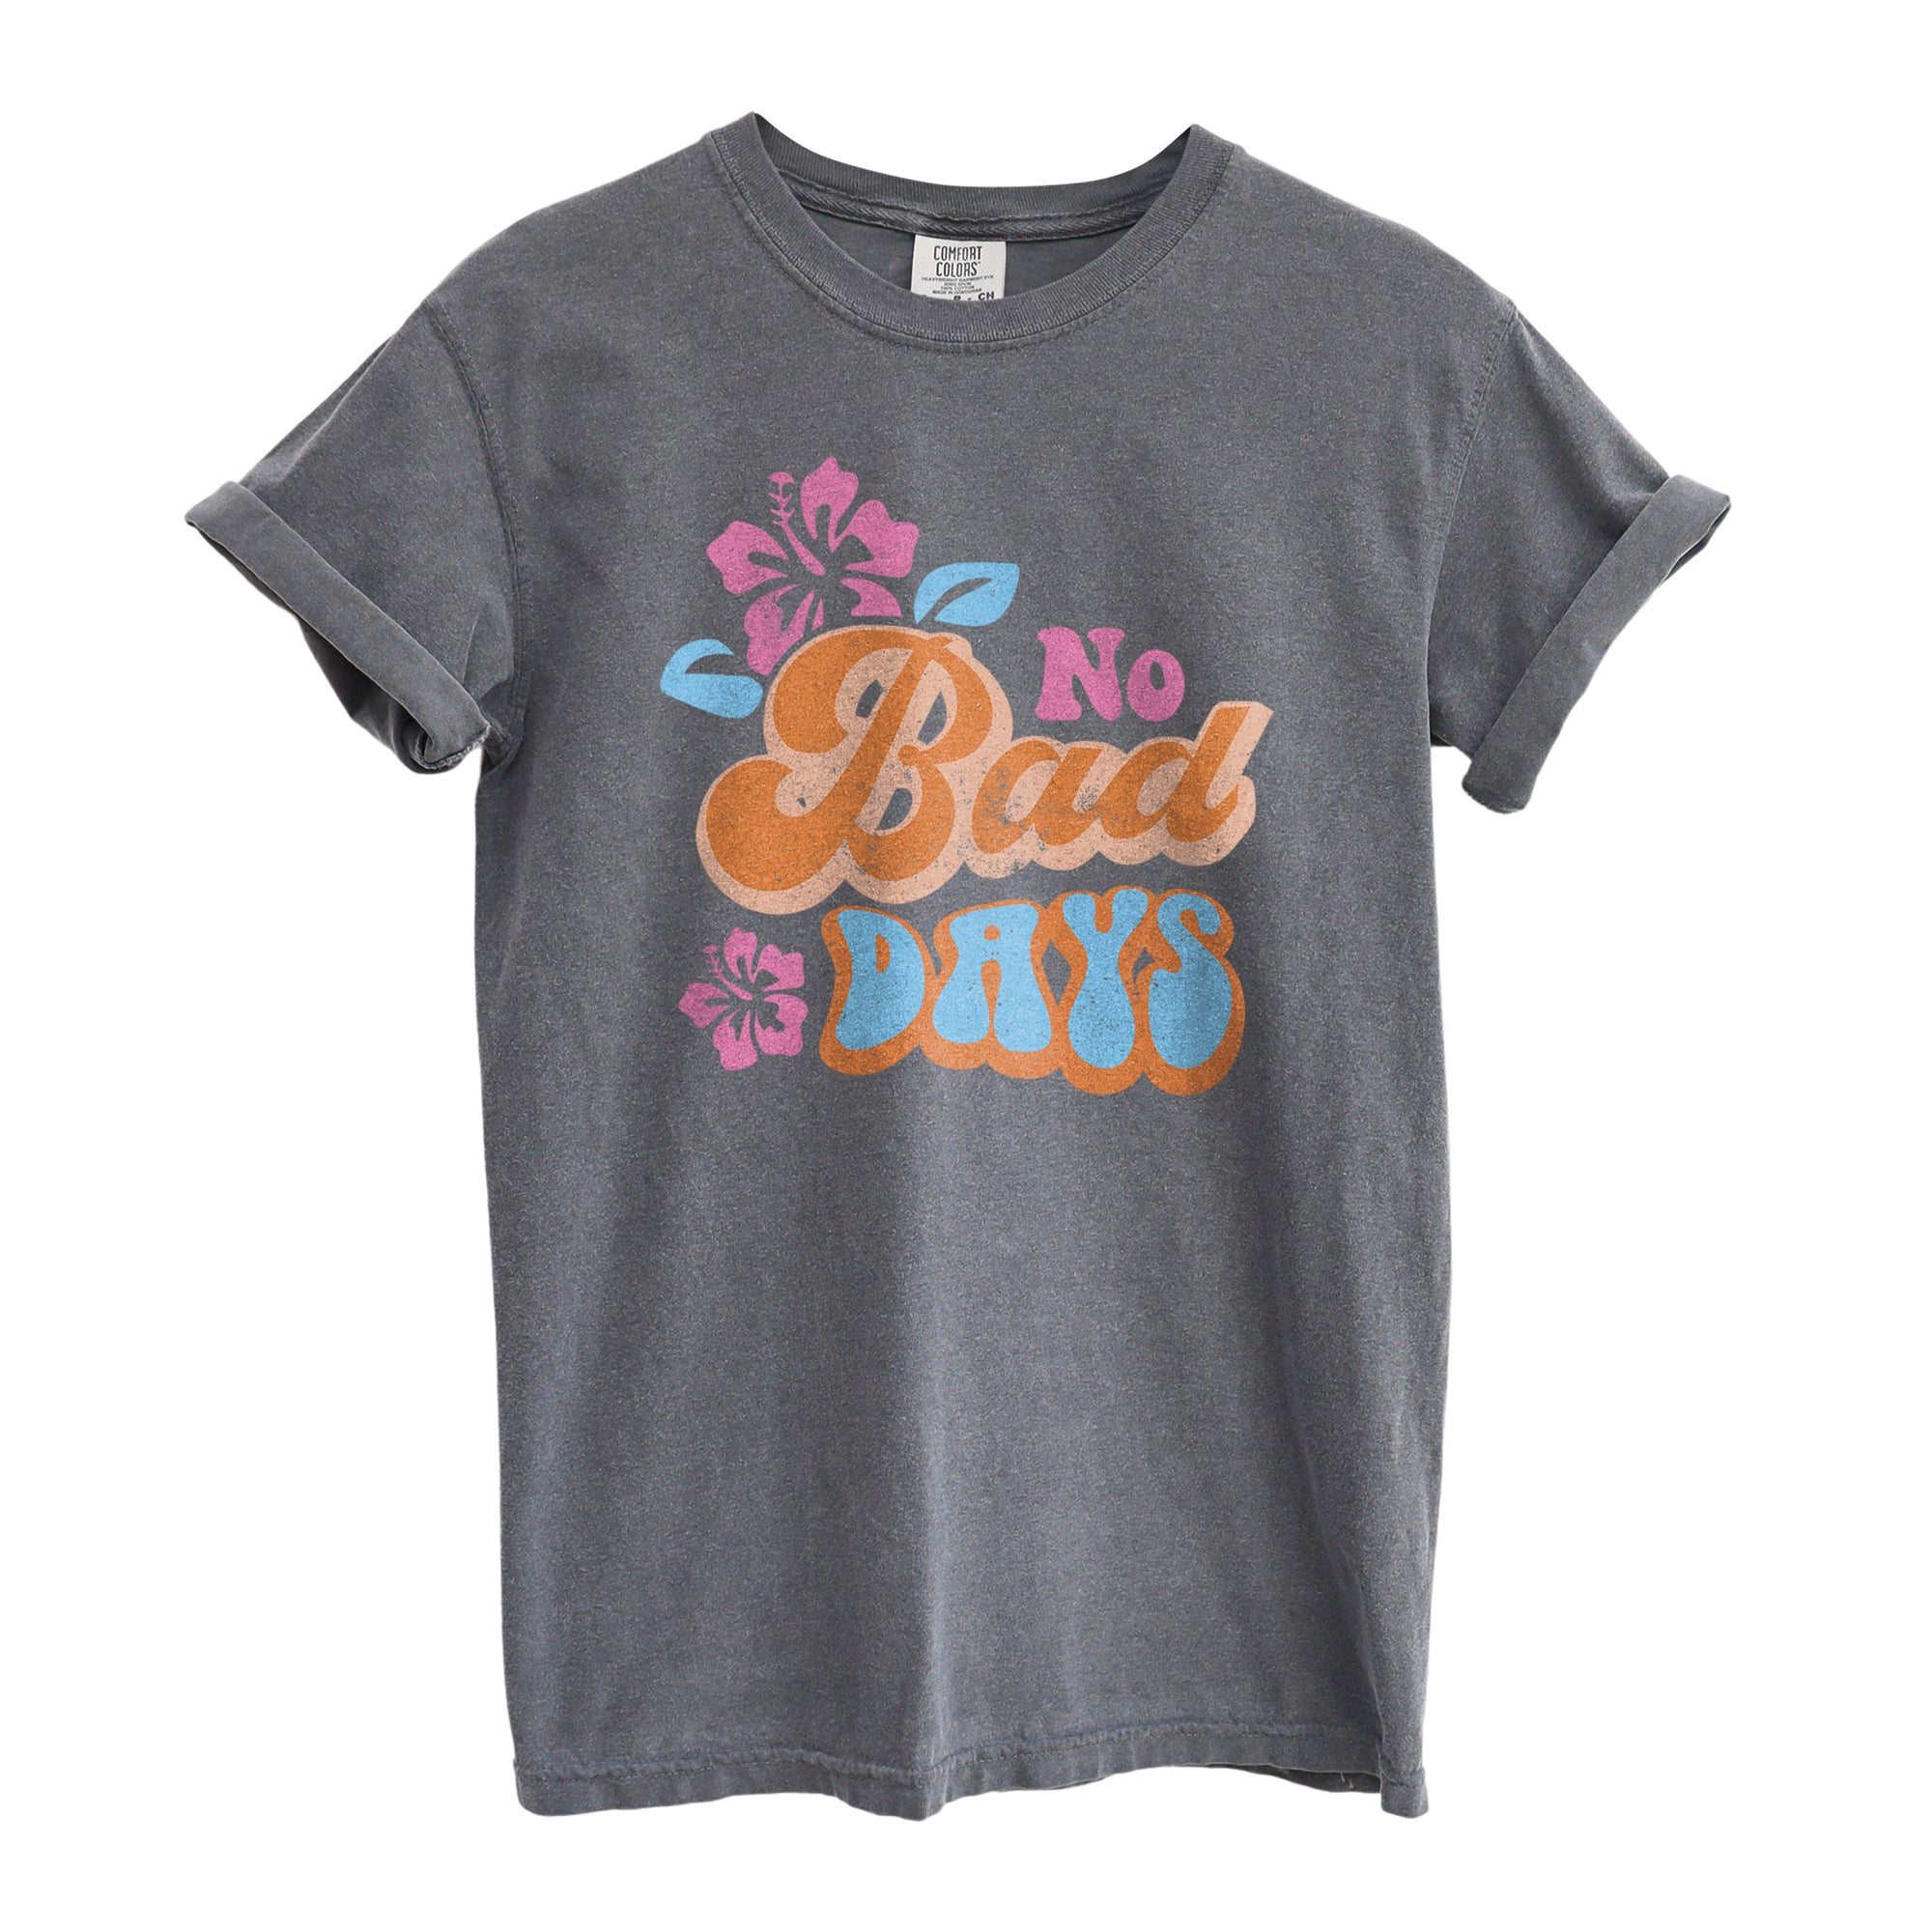 No Bad Days Oversized Shirt Garment-Dyed Graphic Tee